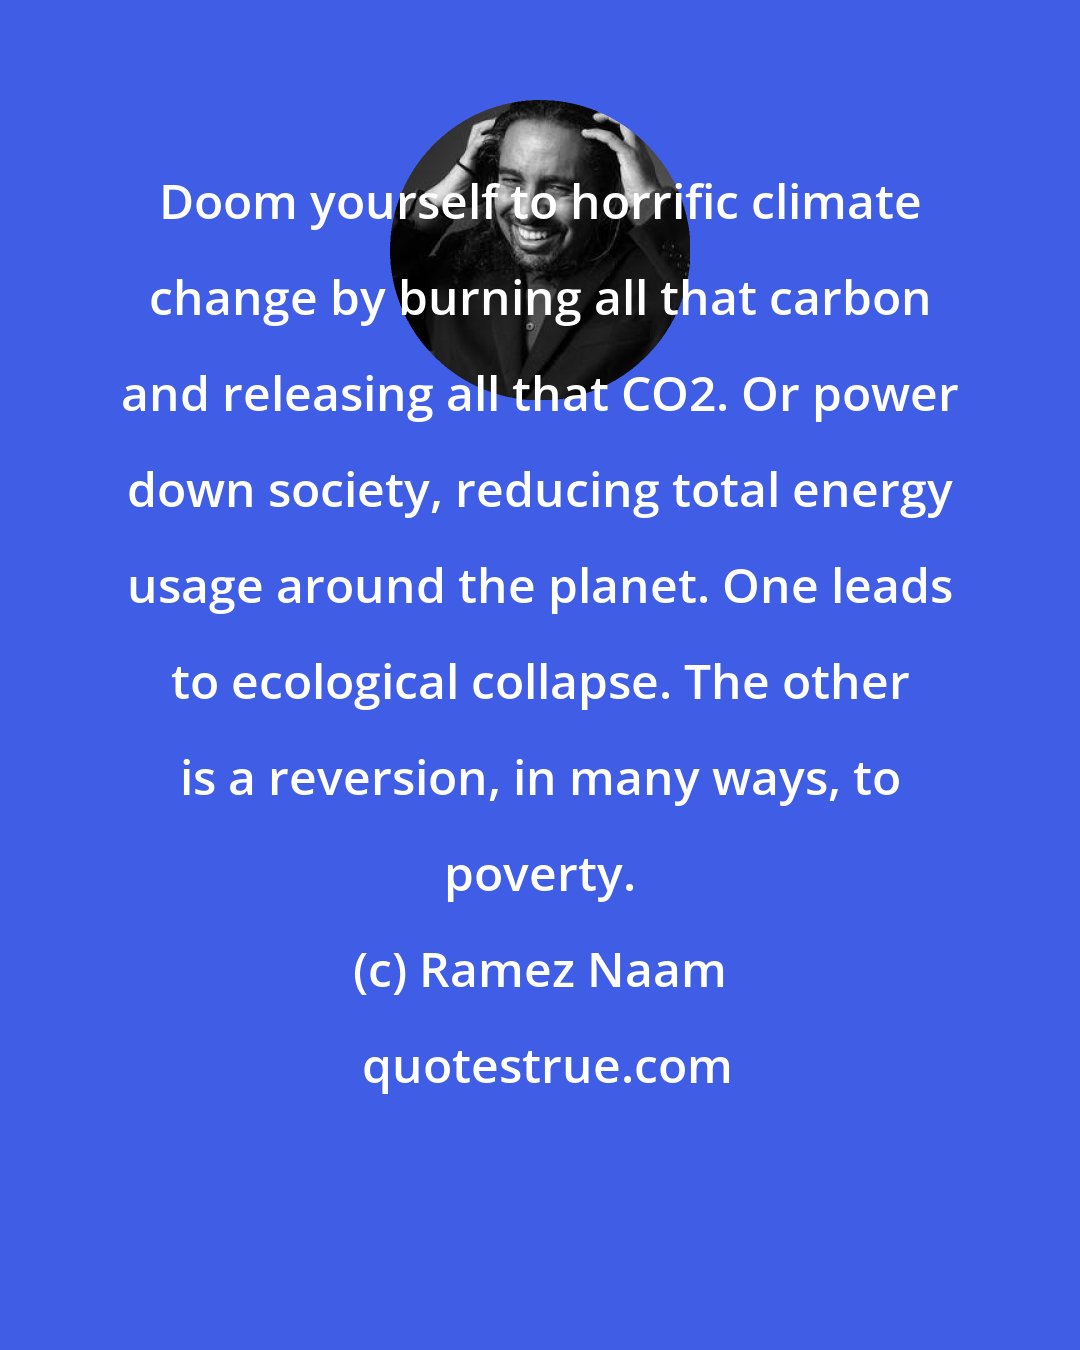 Ramez Naam: Doom yourself to horrific climate change by burning all that carbon and releasing all that CO2. Or power down society, reducing total energy usage around the planet. One leads to ecological collapse. The other is a reversion, in many ways, to poverty.